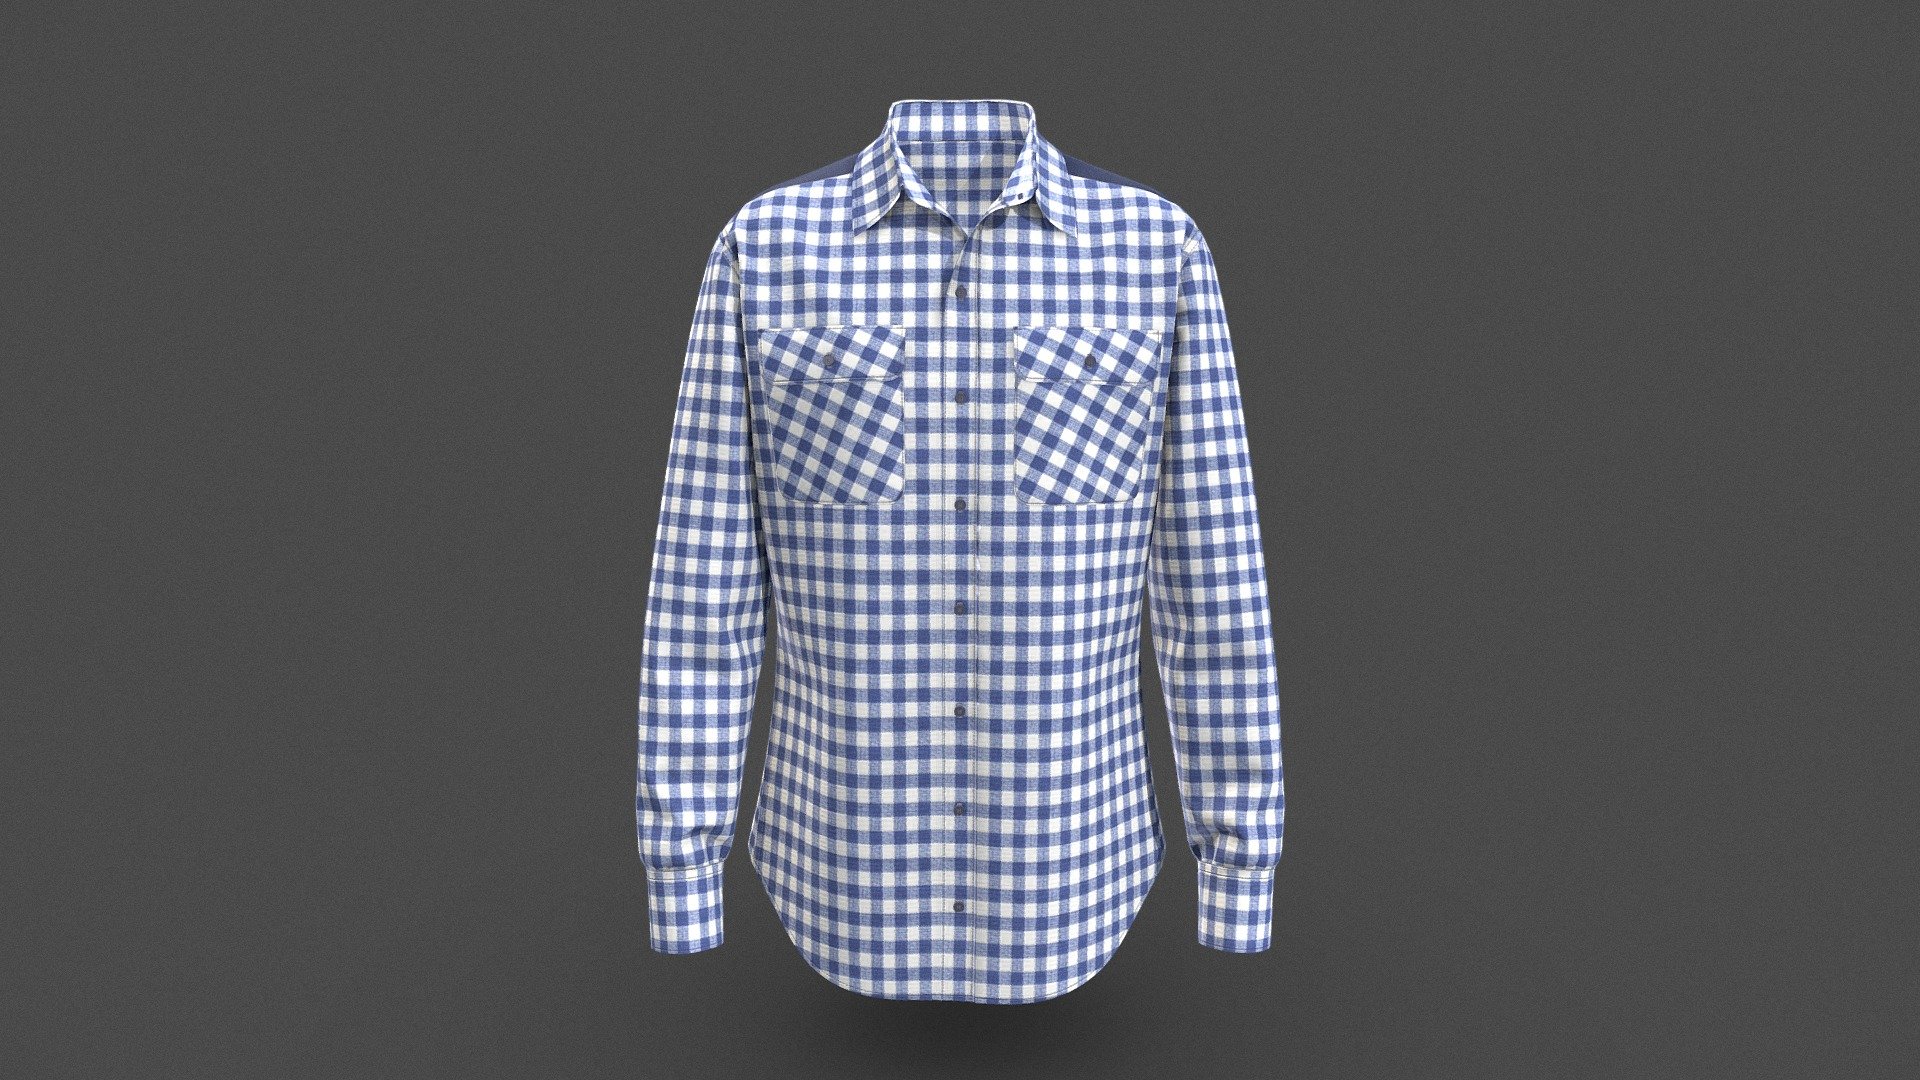 Men Full Sleeve Apparel Check Fashion Shirt
Version V1.0

Realistic high detailed Men Check Shirt with high resolution textures. Model created by our unique processing &amp; Optimized for Web and AR / VR. 

SKU: BC10058

Features

Optimized &amp; NON-Optimized obj model with 4K texture included




Optimized for AR/VR/MR

4K &amp; 2K fabric texture and details

Optimized model is 3.20MB

NON-Optimized model is 22.1MB

Unit measurement of obj is cm

Unit measurement of glb is meter

Includes high detailed normal map

Fabric &amp; print texture details included

GLB file in 2k texture size is 2.58MB

GLB file in 4k texture size is 7.60MB 

Triangular Mesh with 19K Vertices

Suitable for web application configurator development

Fully unwrap UV

The model has 1 material

Texture map: Base color, Normal, Occlusion, Roughness, Metallic

For more details or custom order send email: hello@binarycloth.com


Website:binarycloth.com - Men Full Sleeve Apparel Check Fashion Shirt - Buy Royalty Free 3D model by BINARYCLOTH (@binaryclothofficial) 3d model